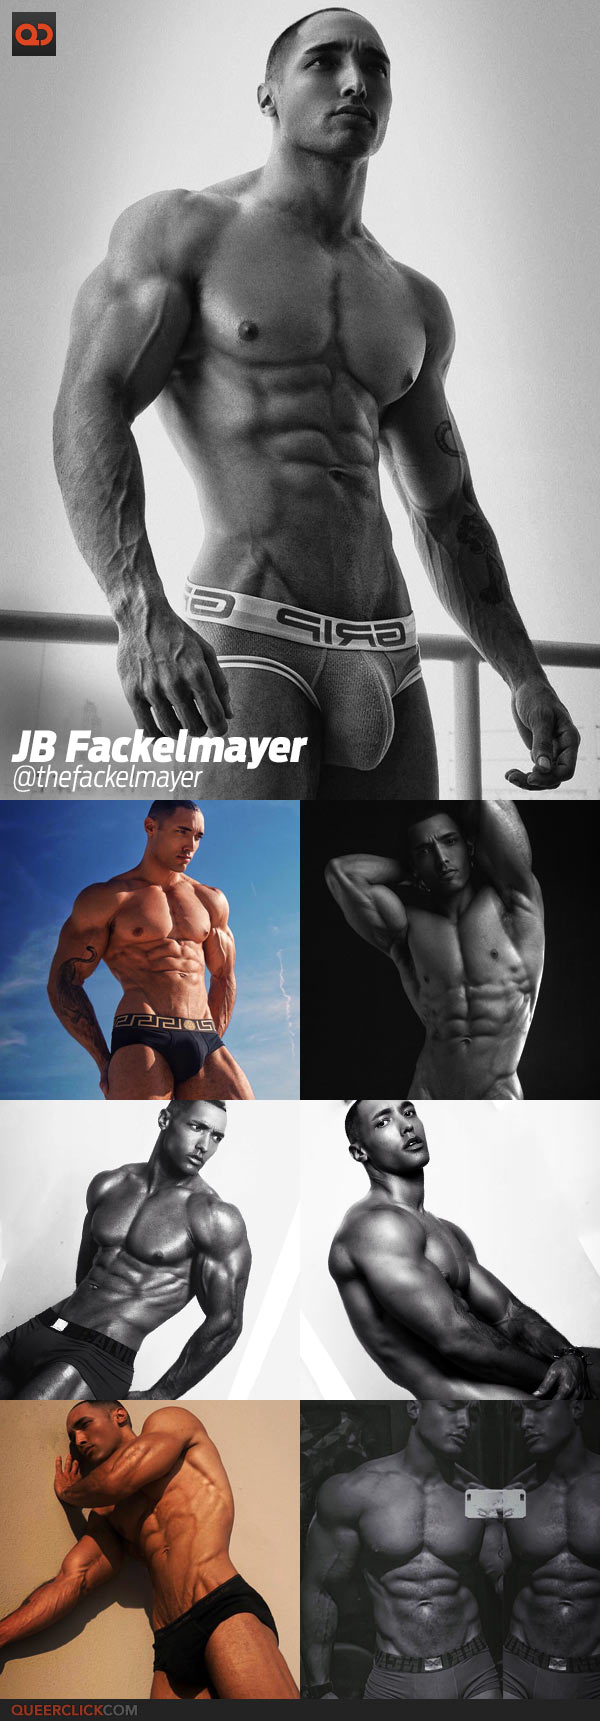 Nine Hot Fitness Models You Need To Follow On Instagram! – Part 5